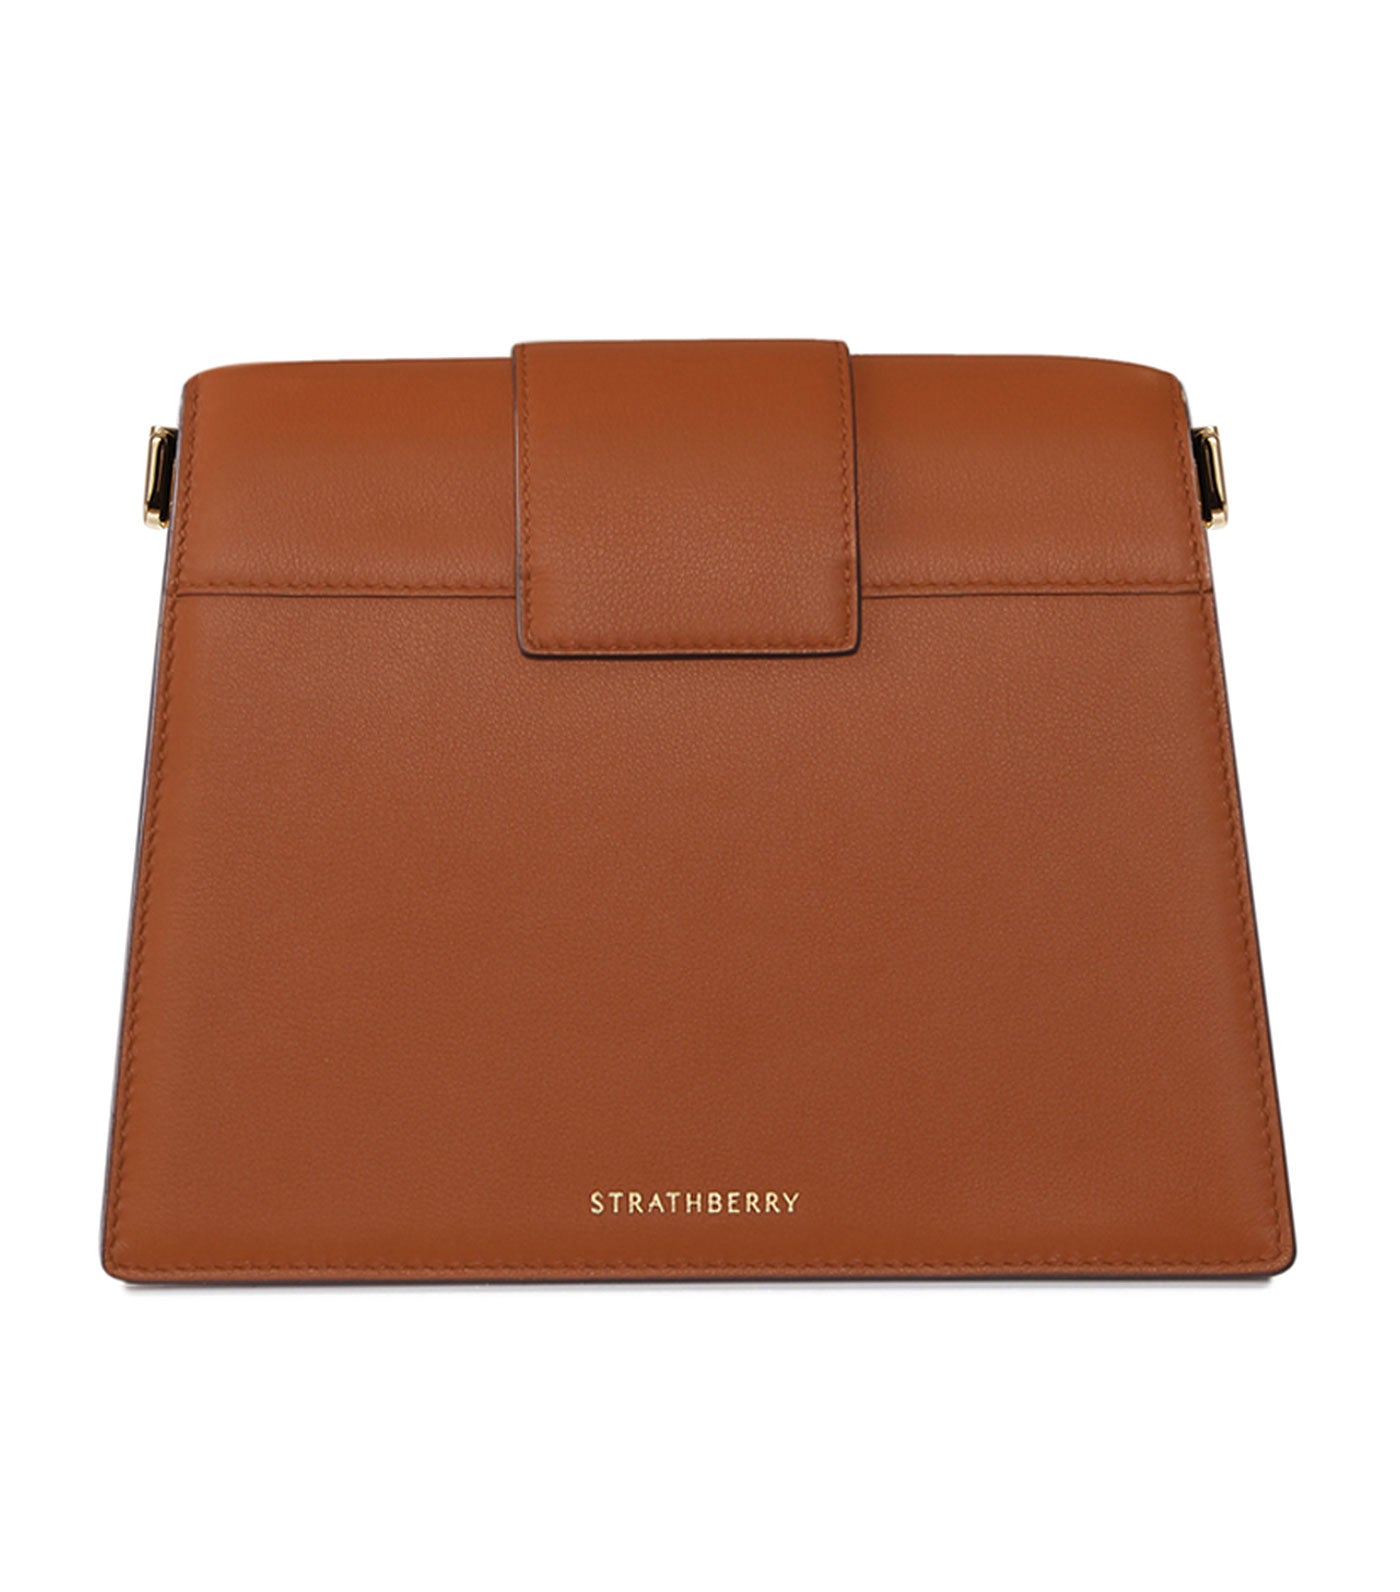 Strathberry Limited Box Crescent - Chestnut with Navy Edge